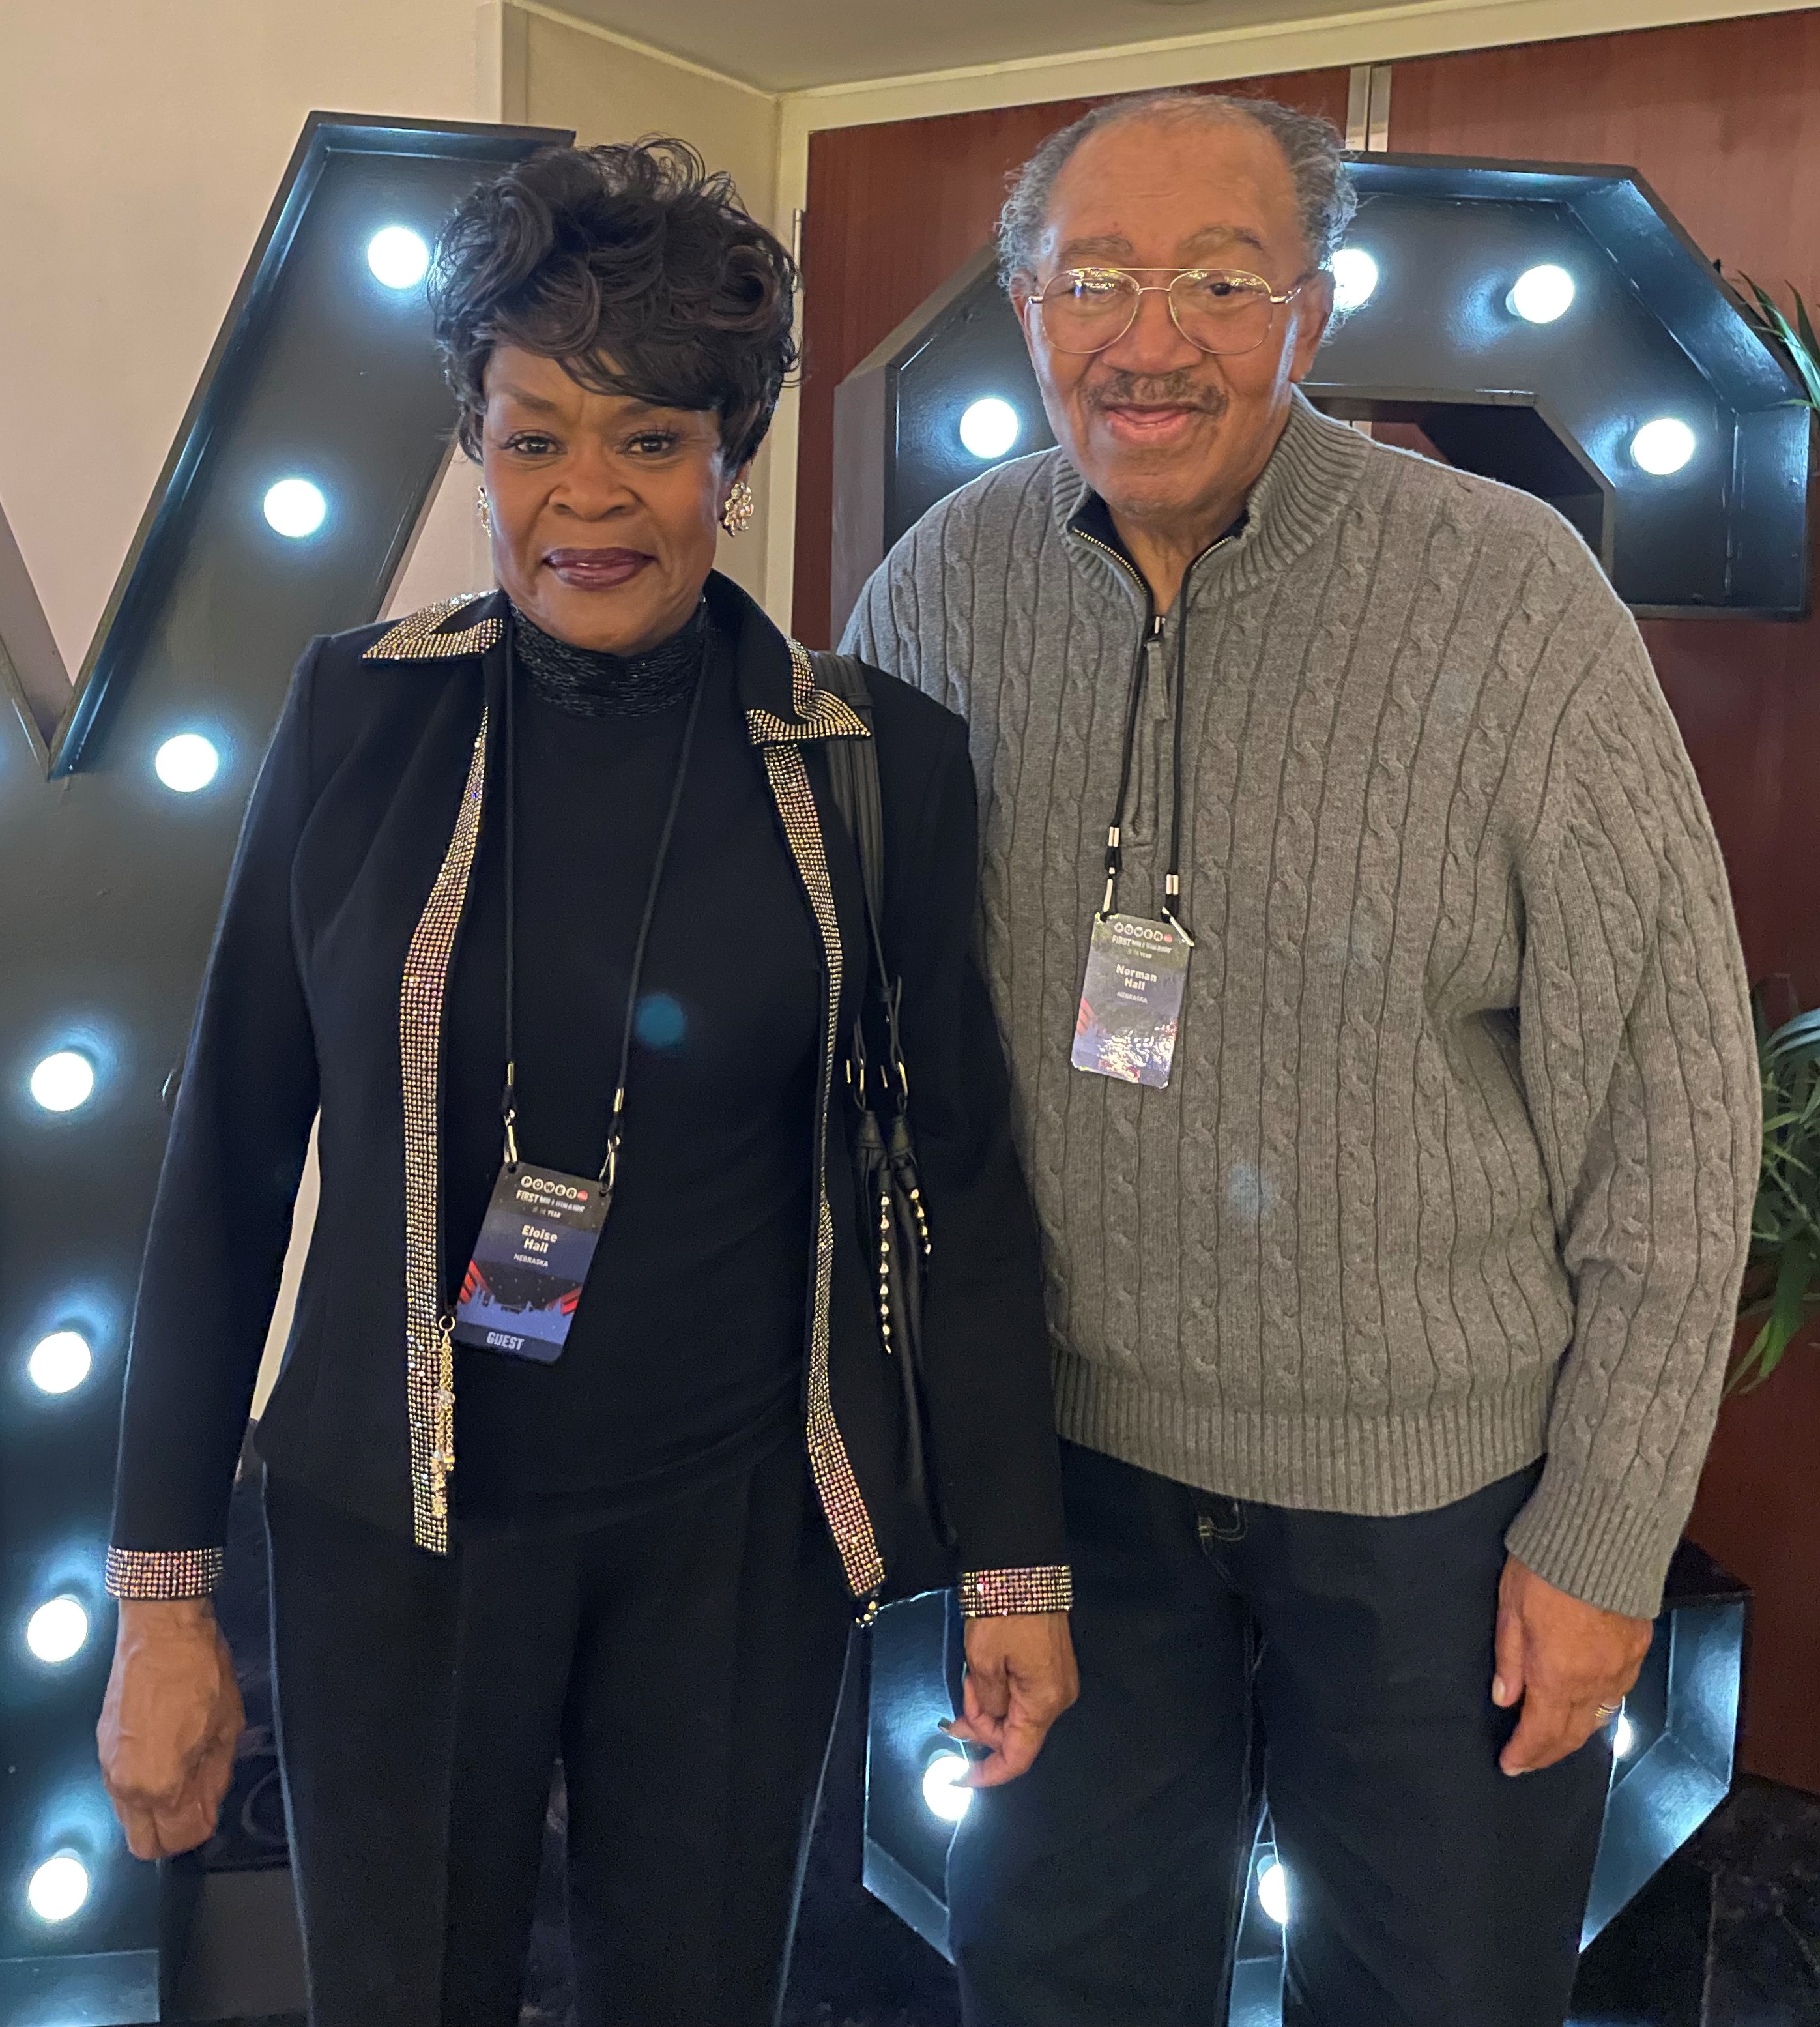 Eloise and Norman Hall of Omaha traveled to New York to celebrate New Year's Eve in Times Square after winning the Nebraska Lottery's Powerball First Millionaire of the Year promotion.